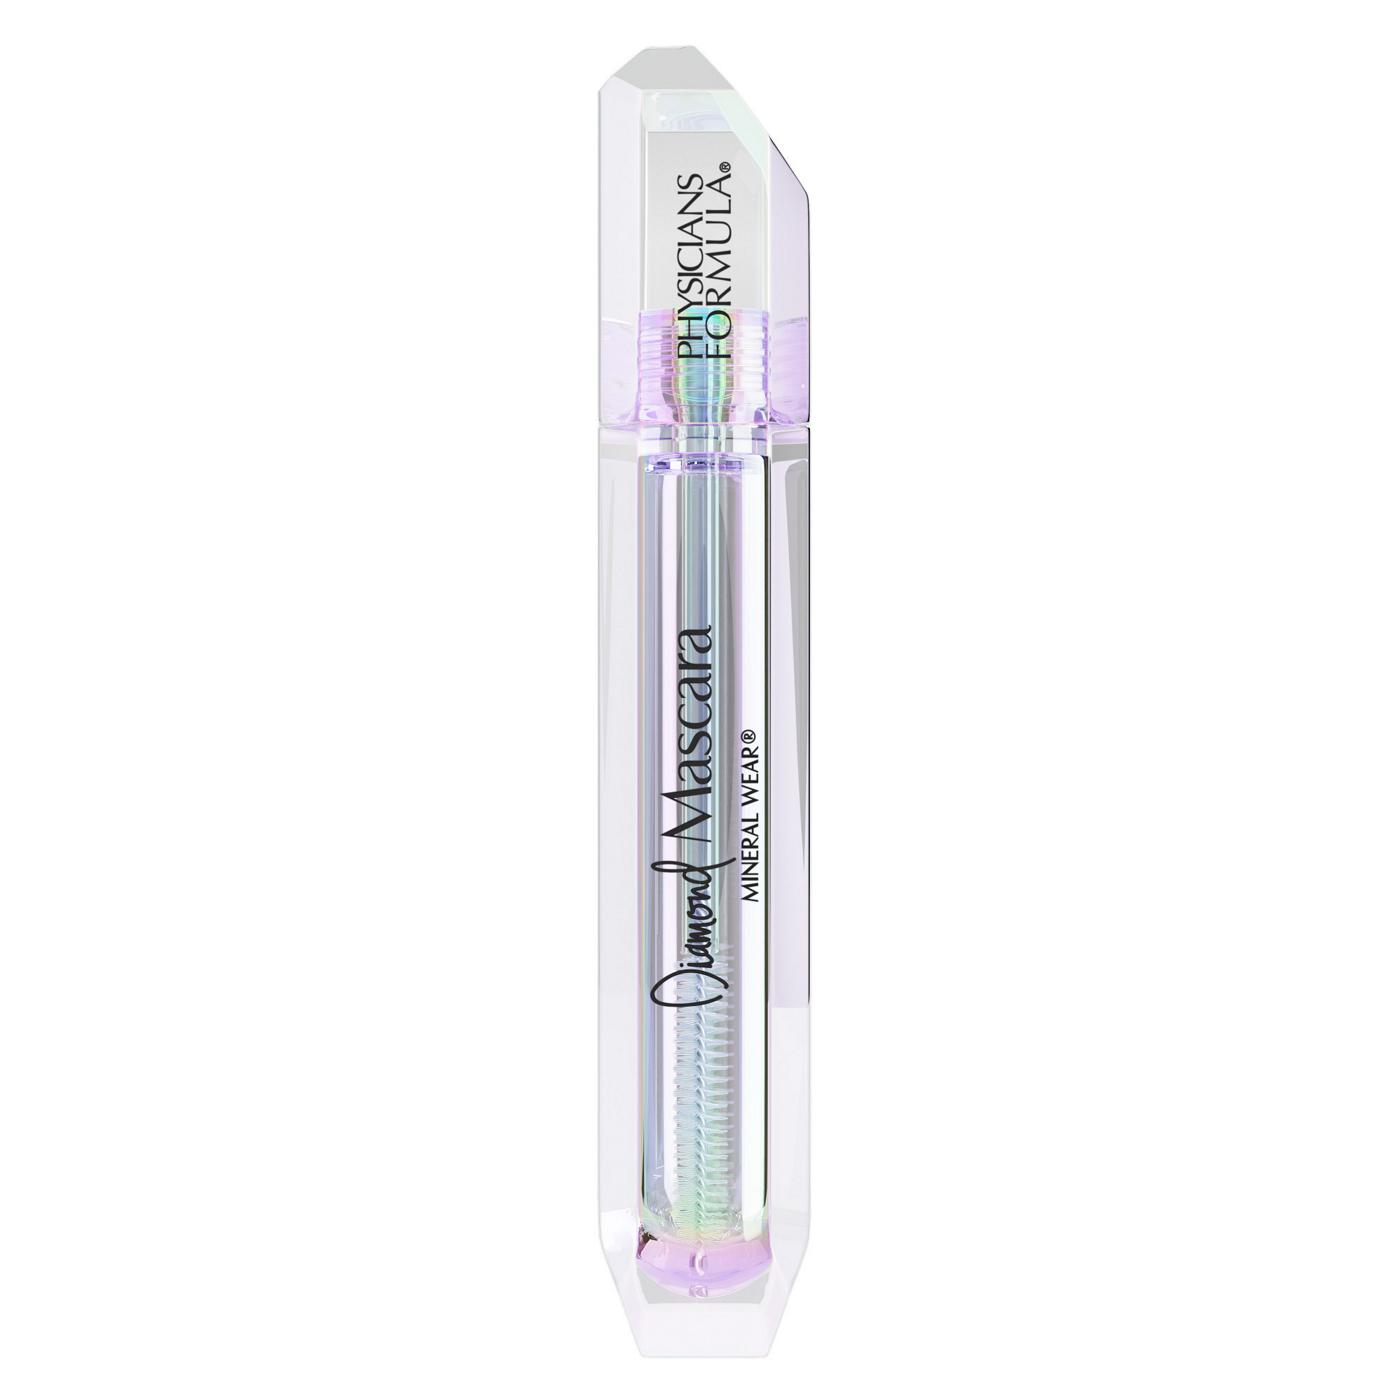 Physicians Formula Diamond Mascara Mineral Wear Clear; image 1 of 3